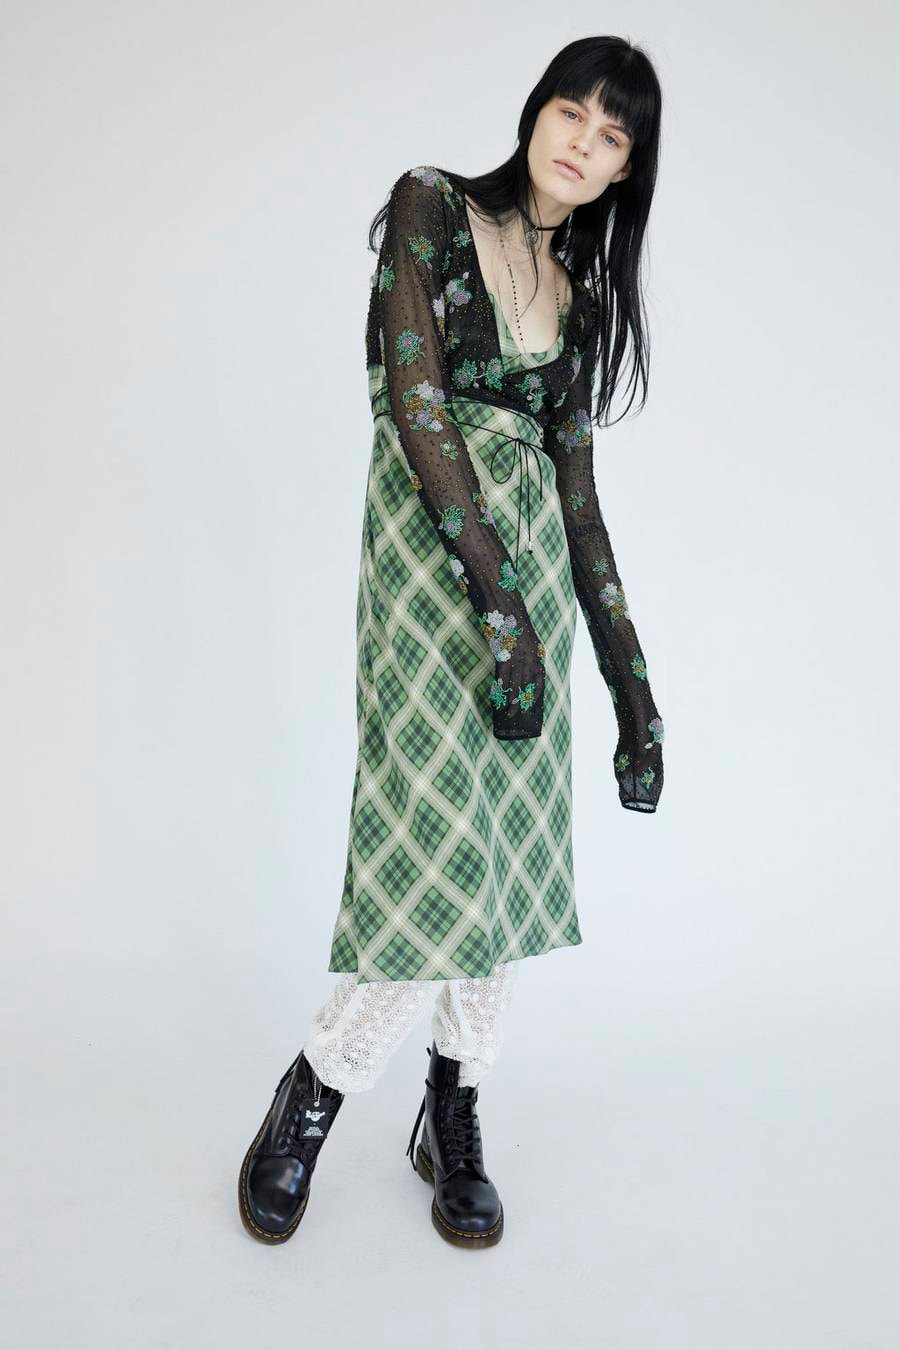 Marc Jacobs Resort 2019 Redux Collection Plaid Strap Midi Dress Green White Floral Embroidered Chiffon Crop Top Black